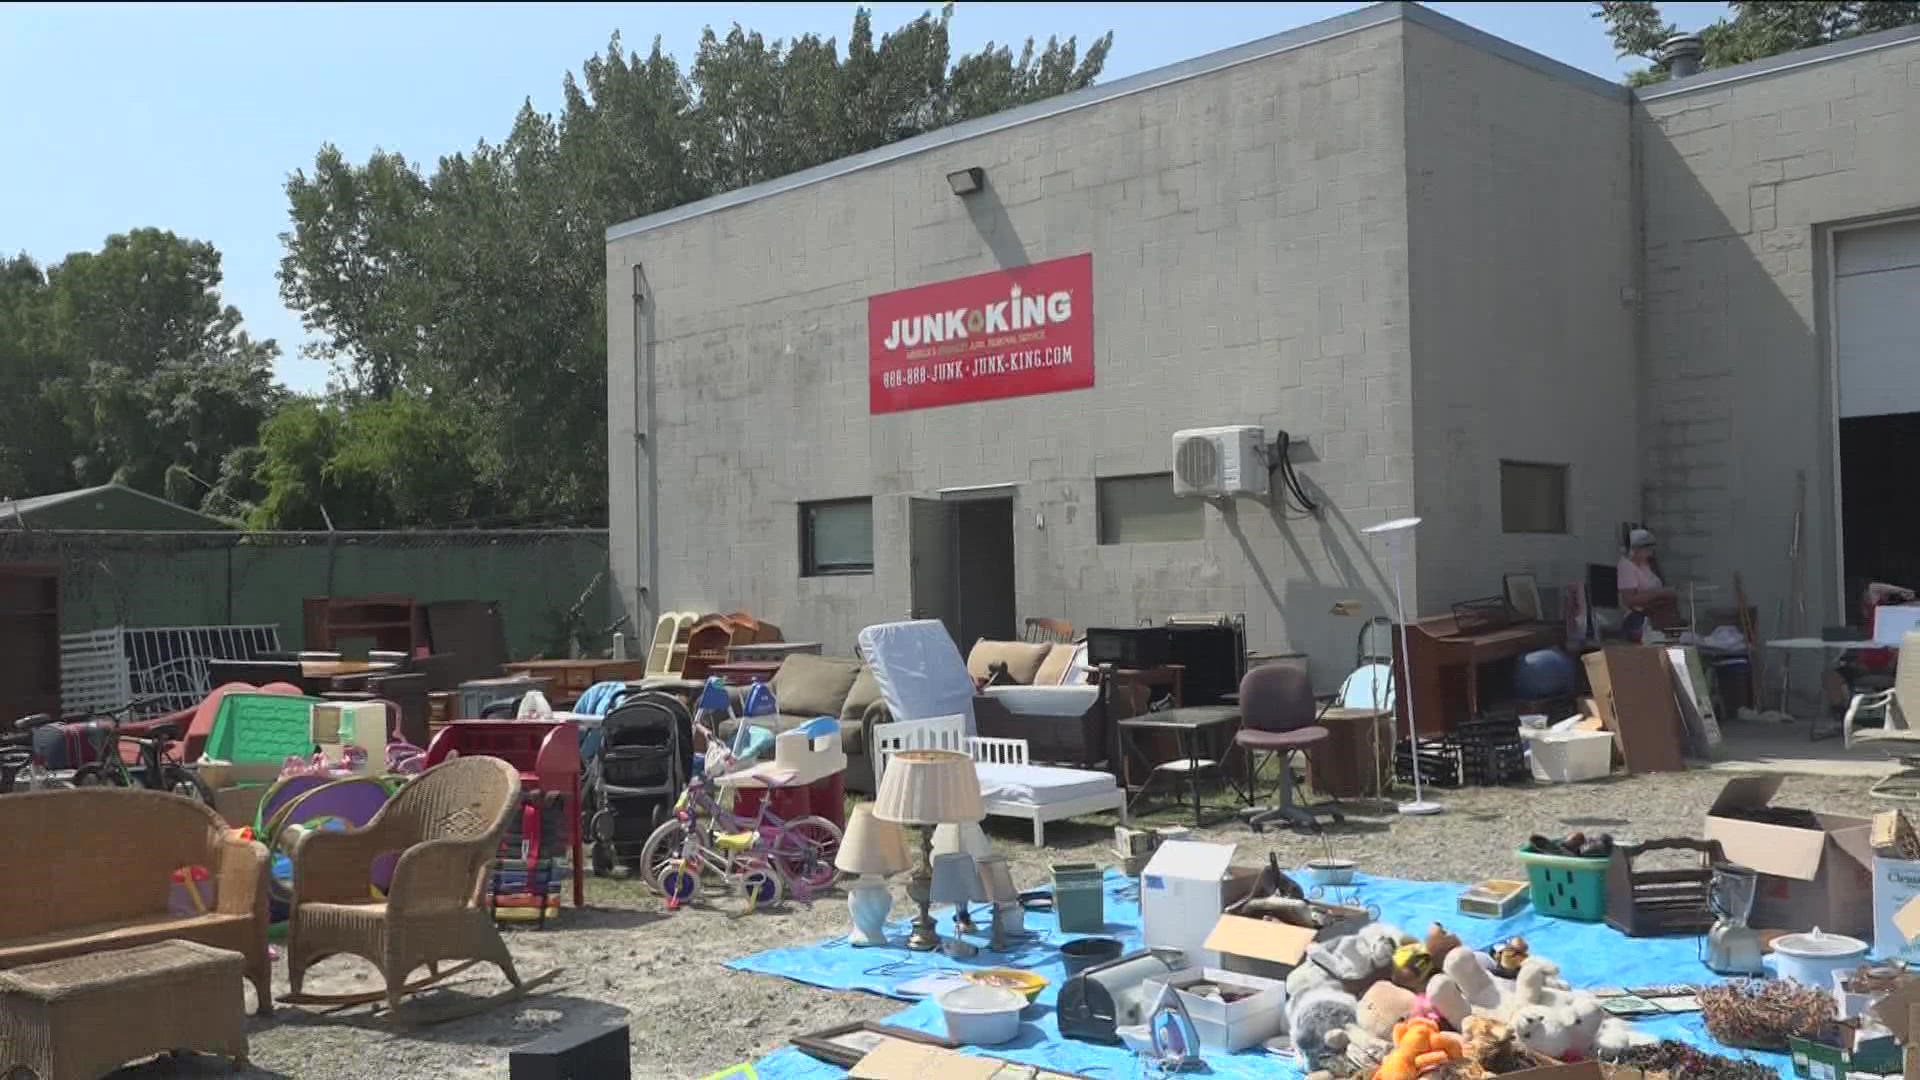 This month, Junk King Toledo is helping Bethany House, a domestic abuse victim assistance organization, by collecting donations through their garage sale.